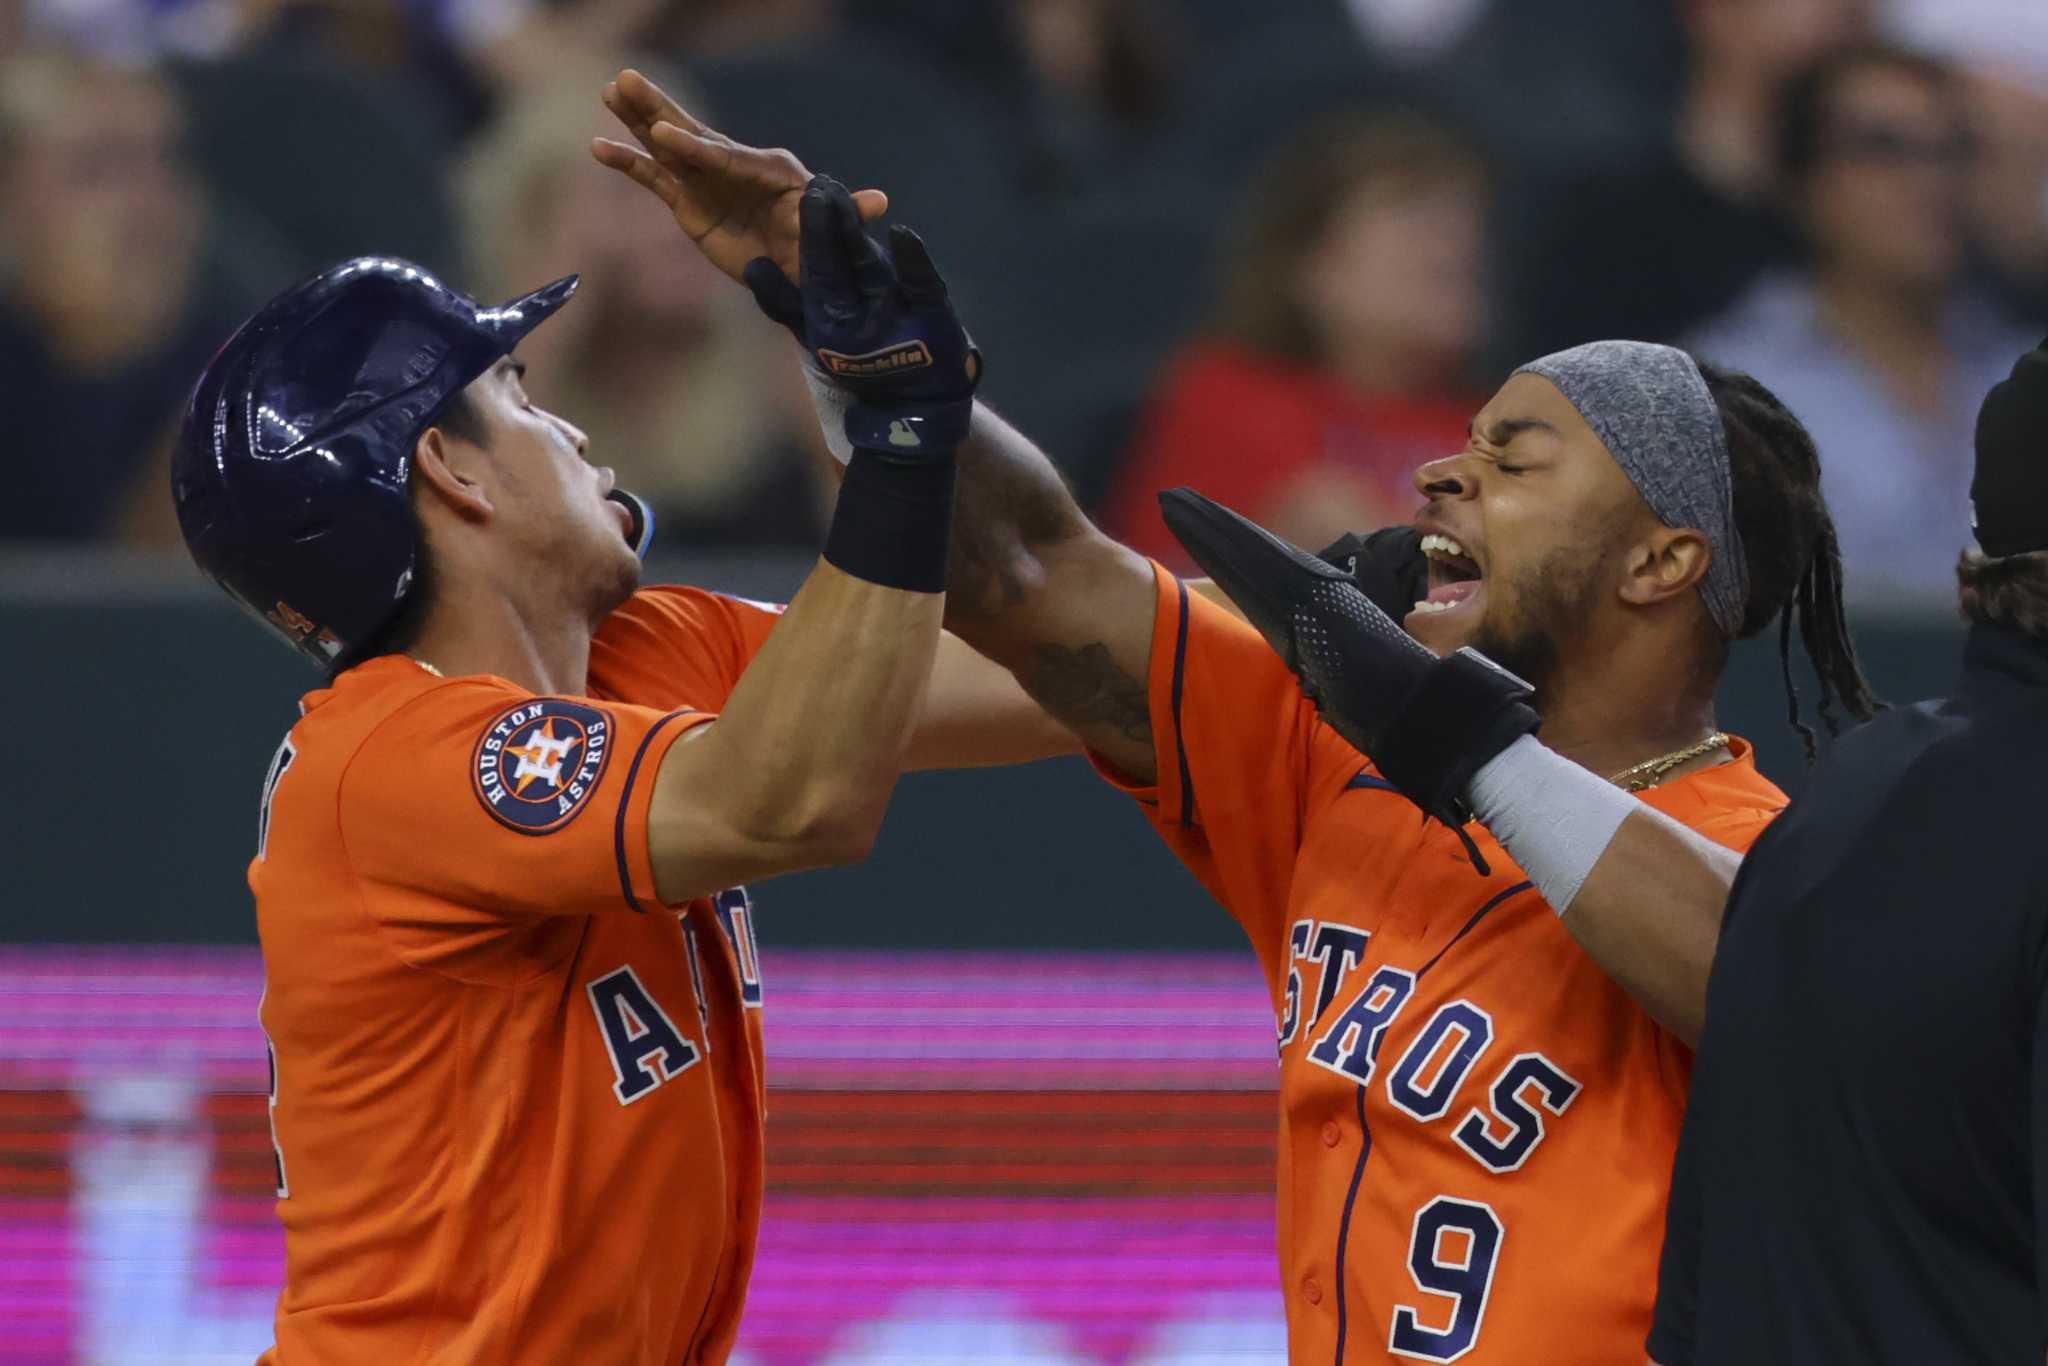 Houston Astros: Late offense leads to win, series lead vs. Rangers